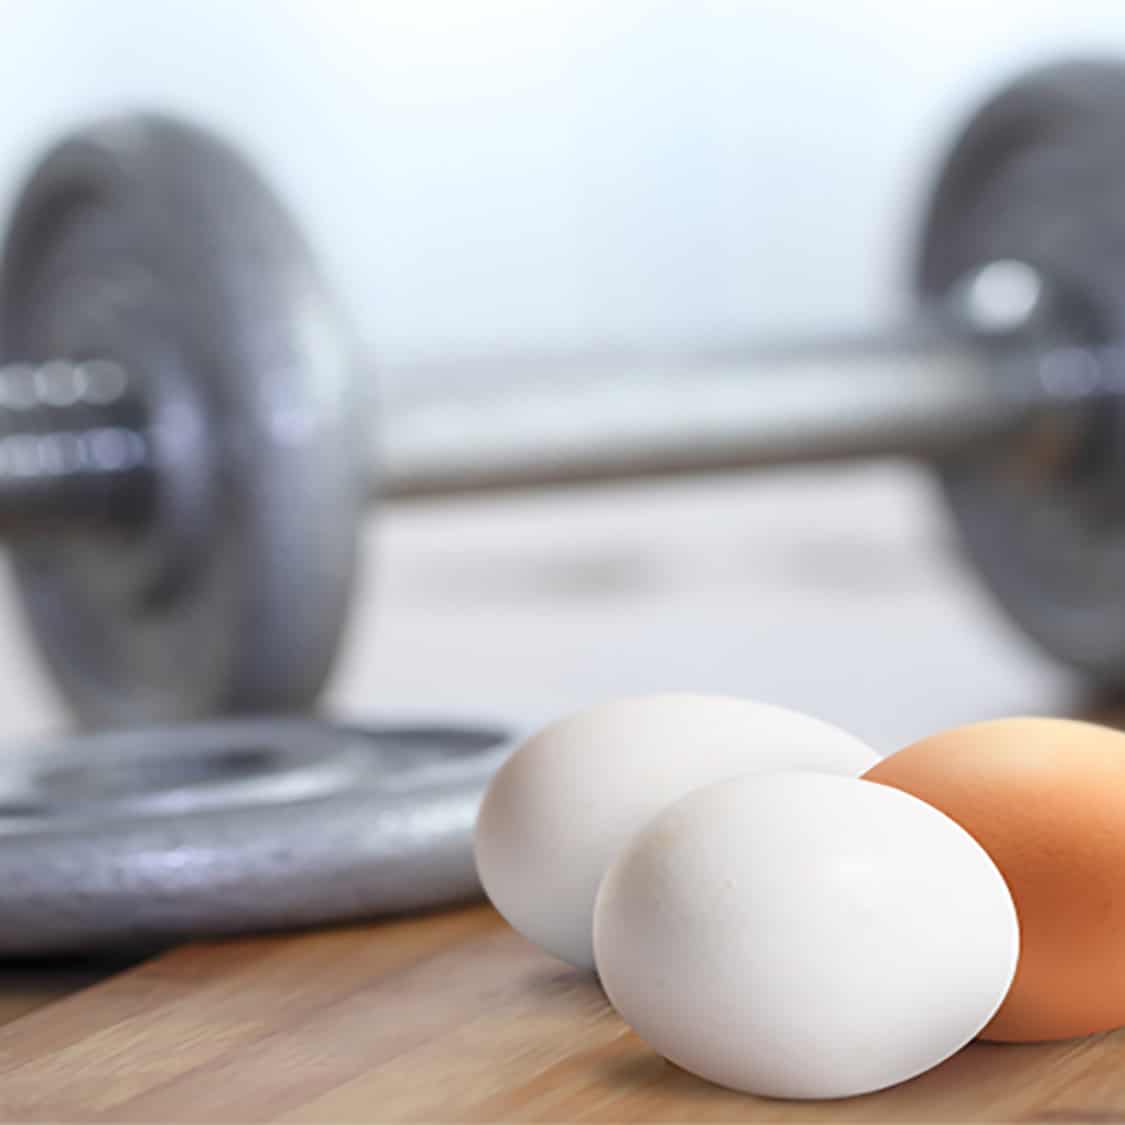 eggs next to a barbell